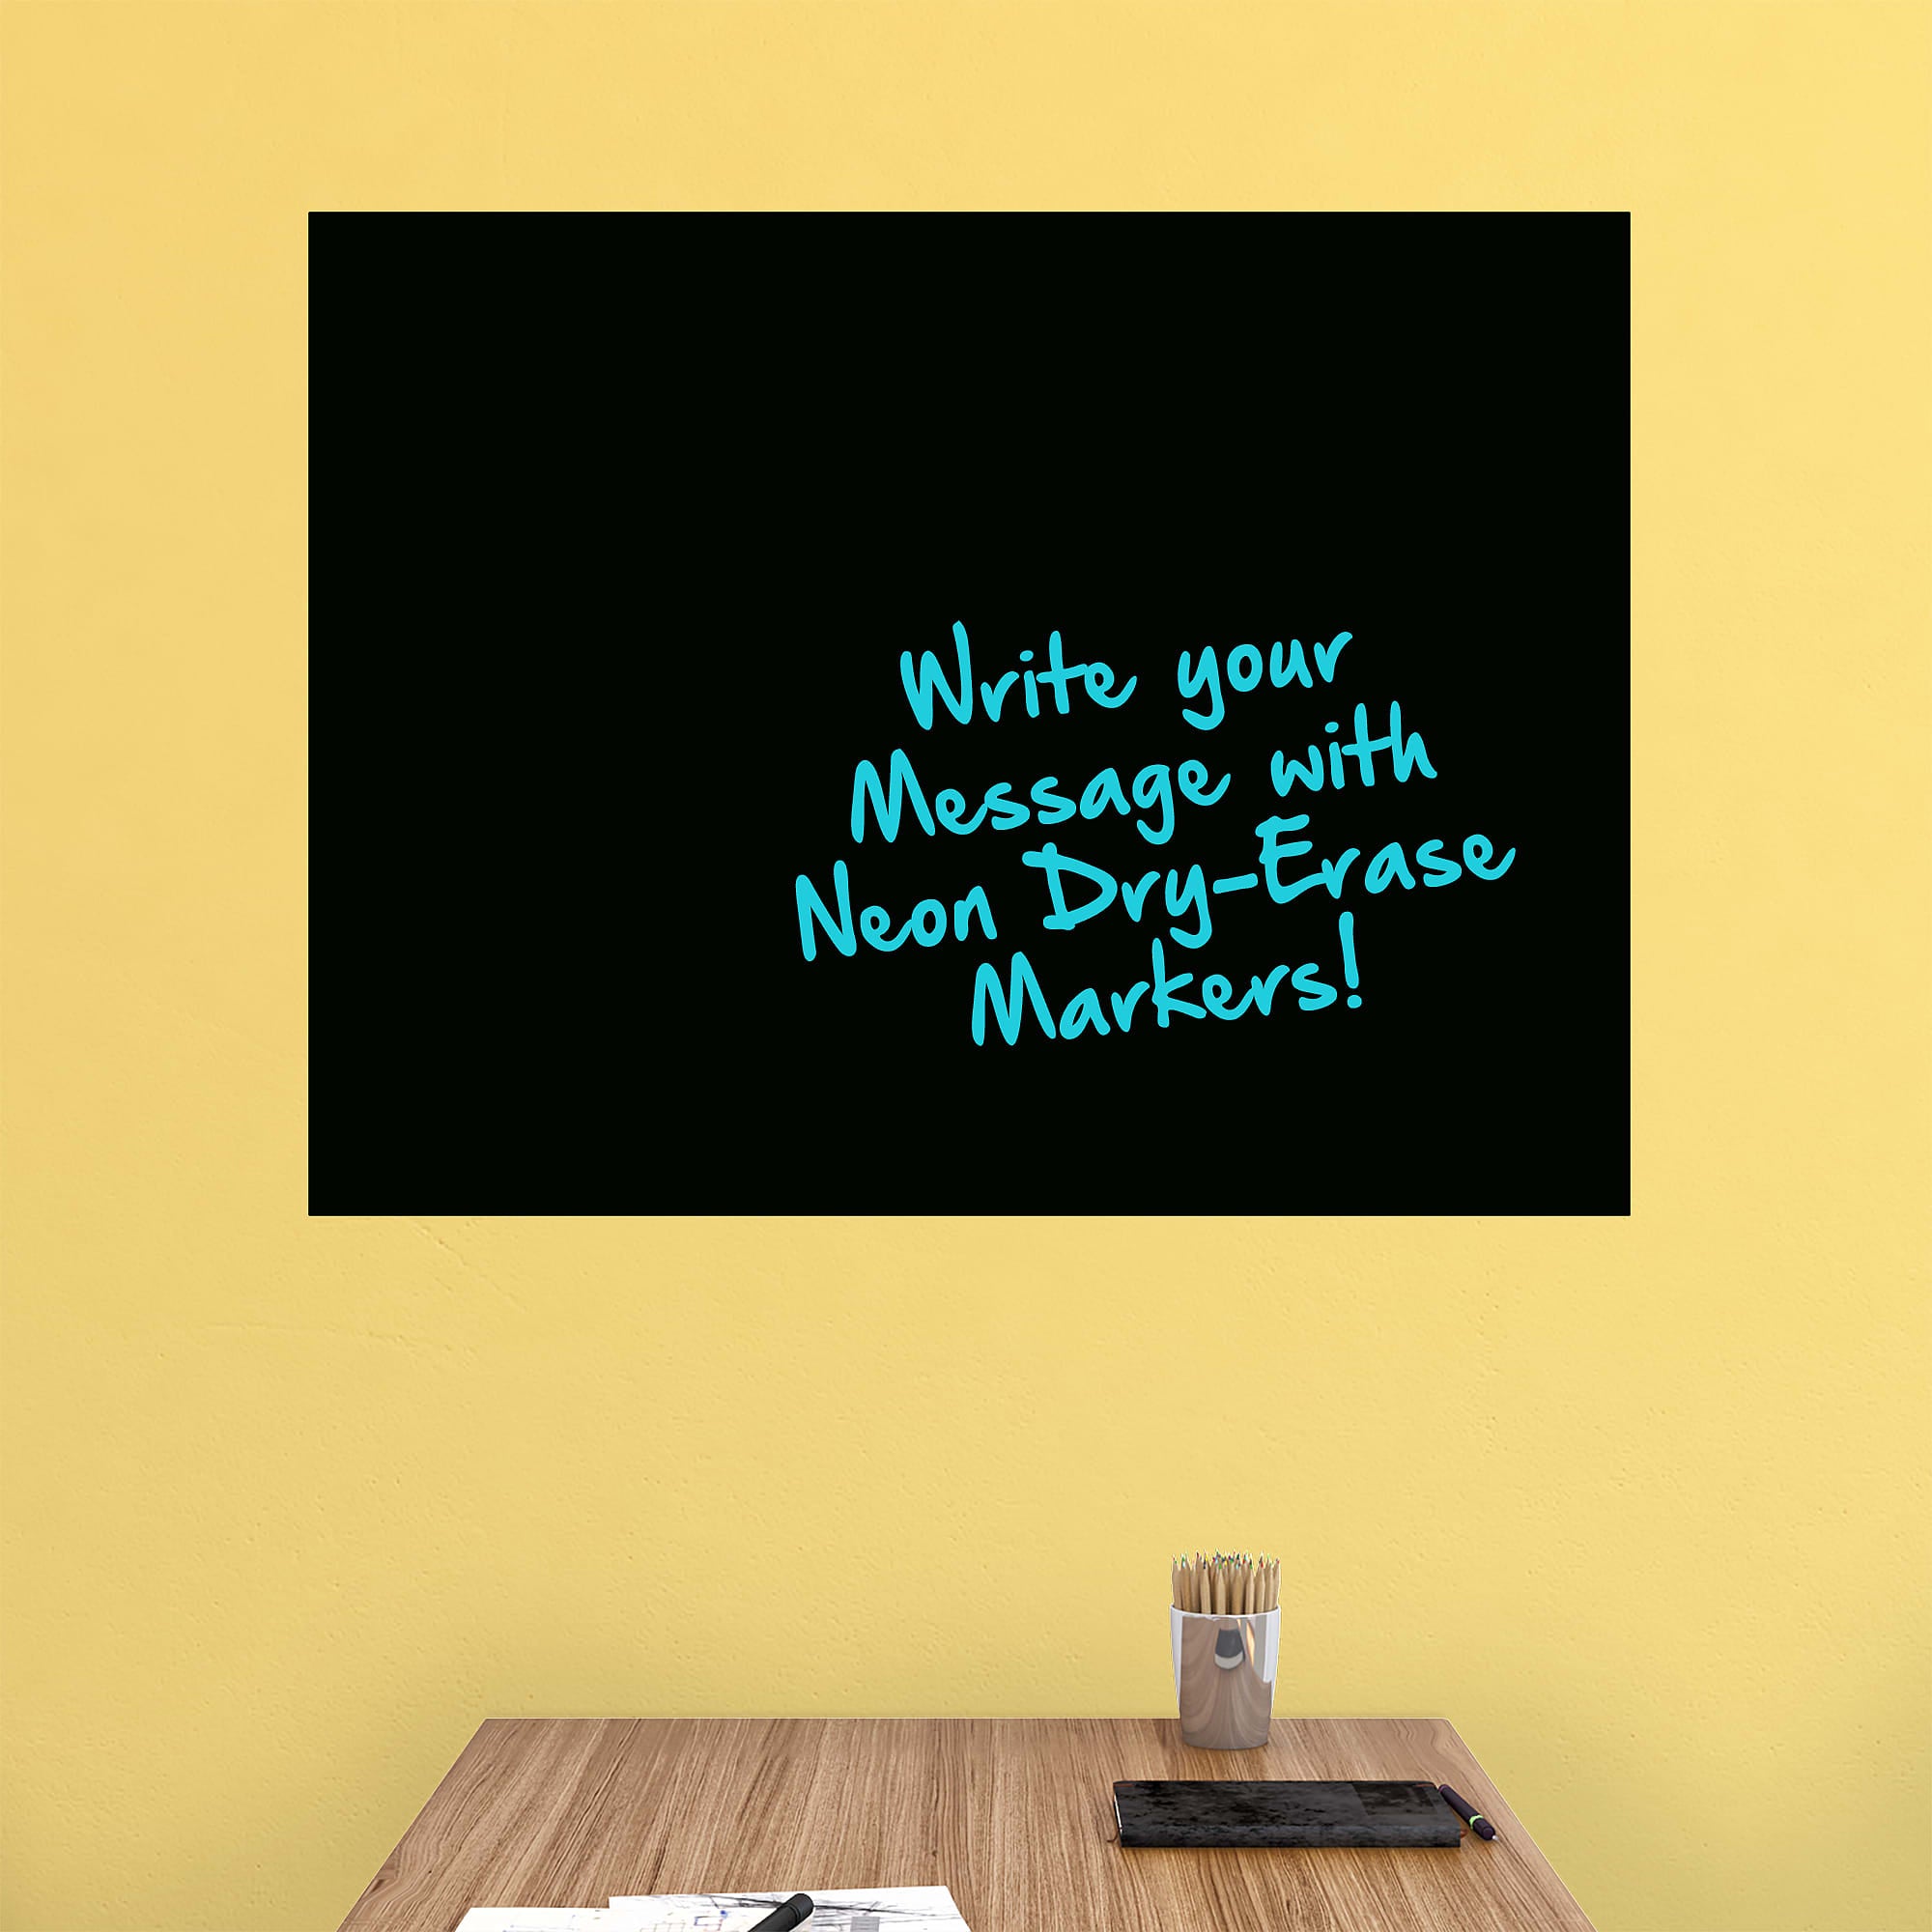 Black Dry Erase Board Removable Wall Decal Life-Size Decal by Fathead | Vinyl